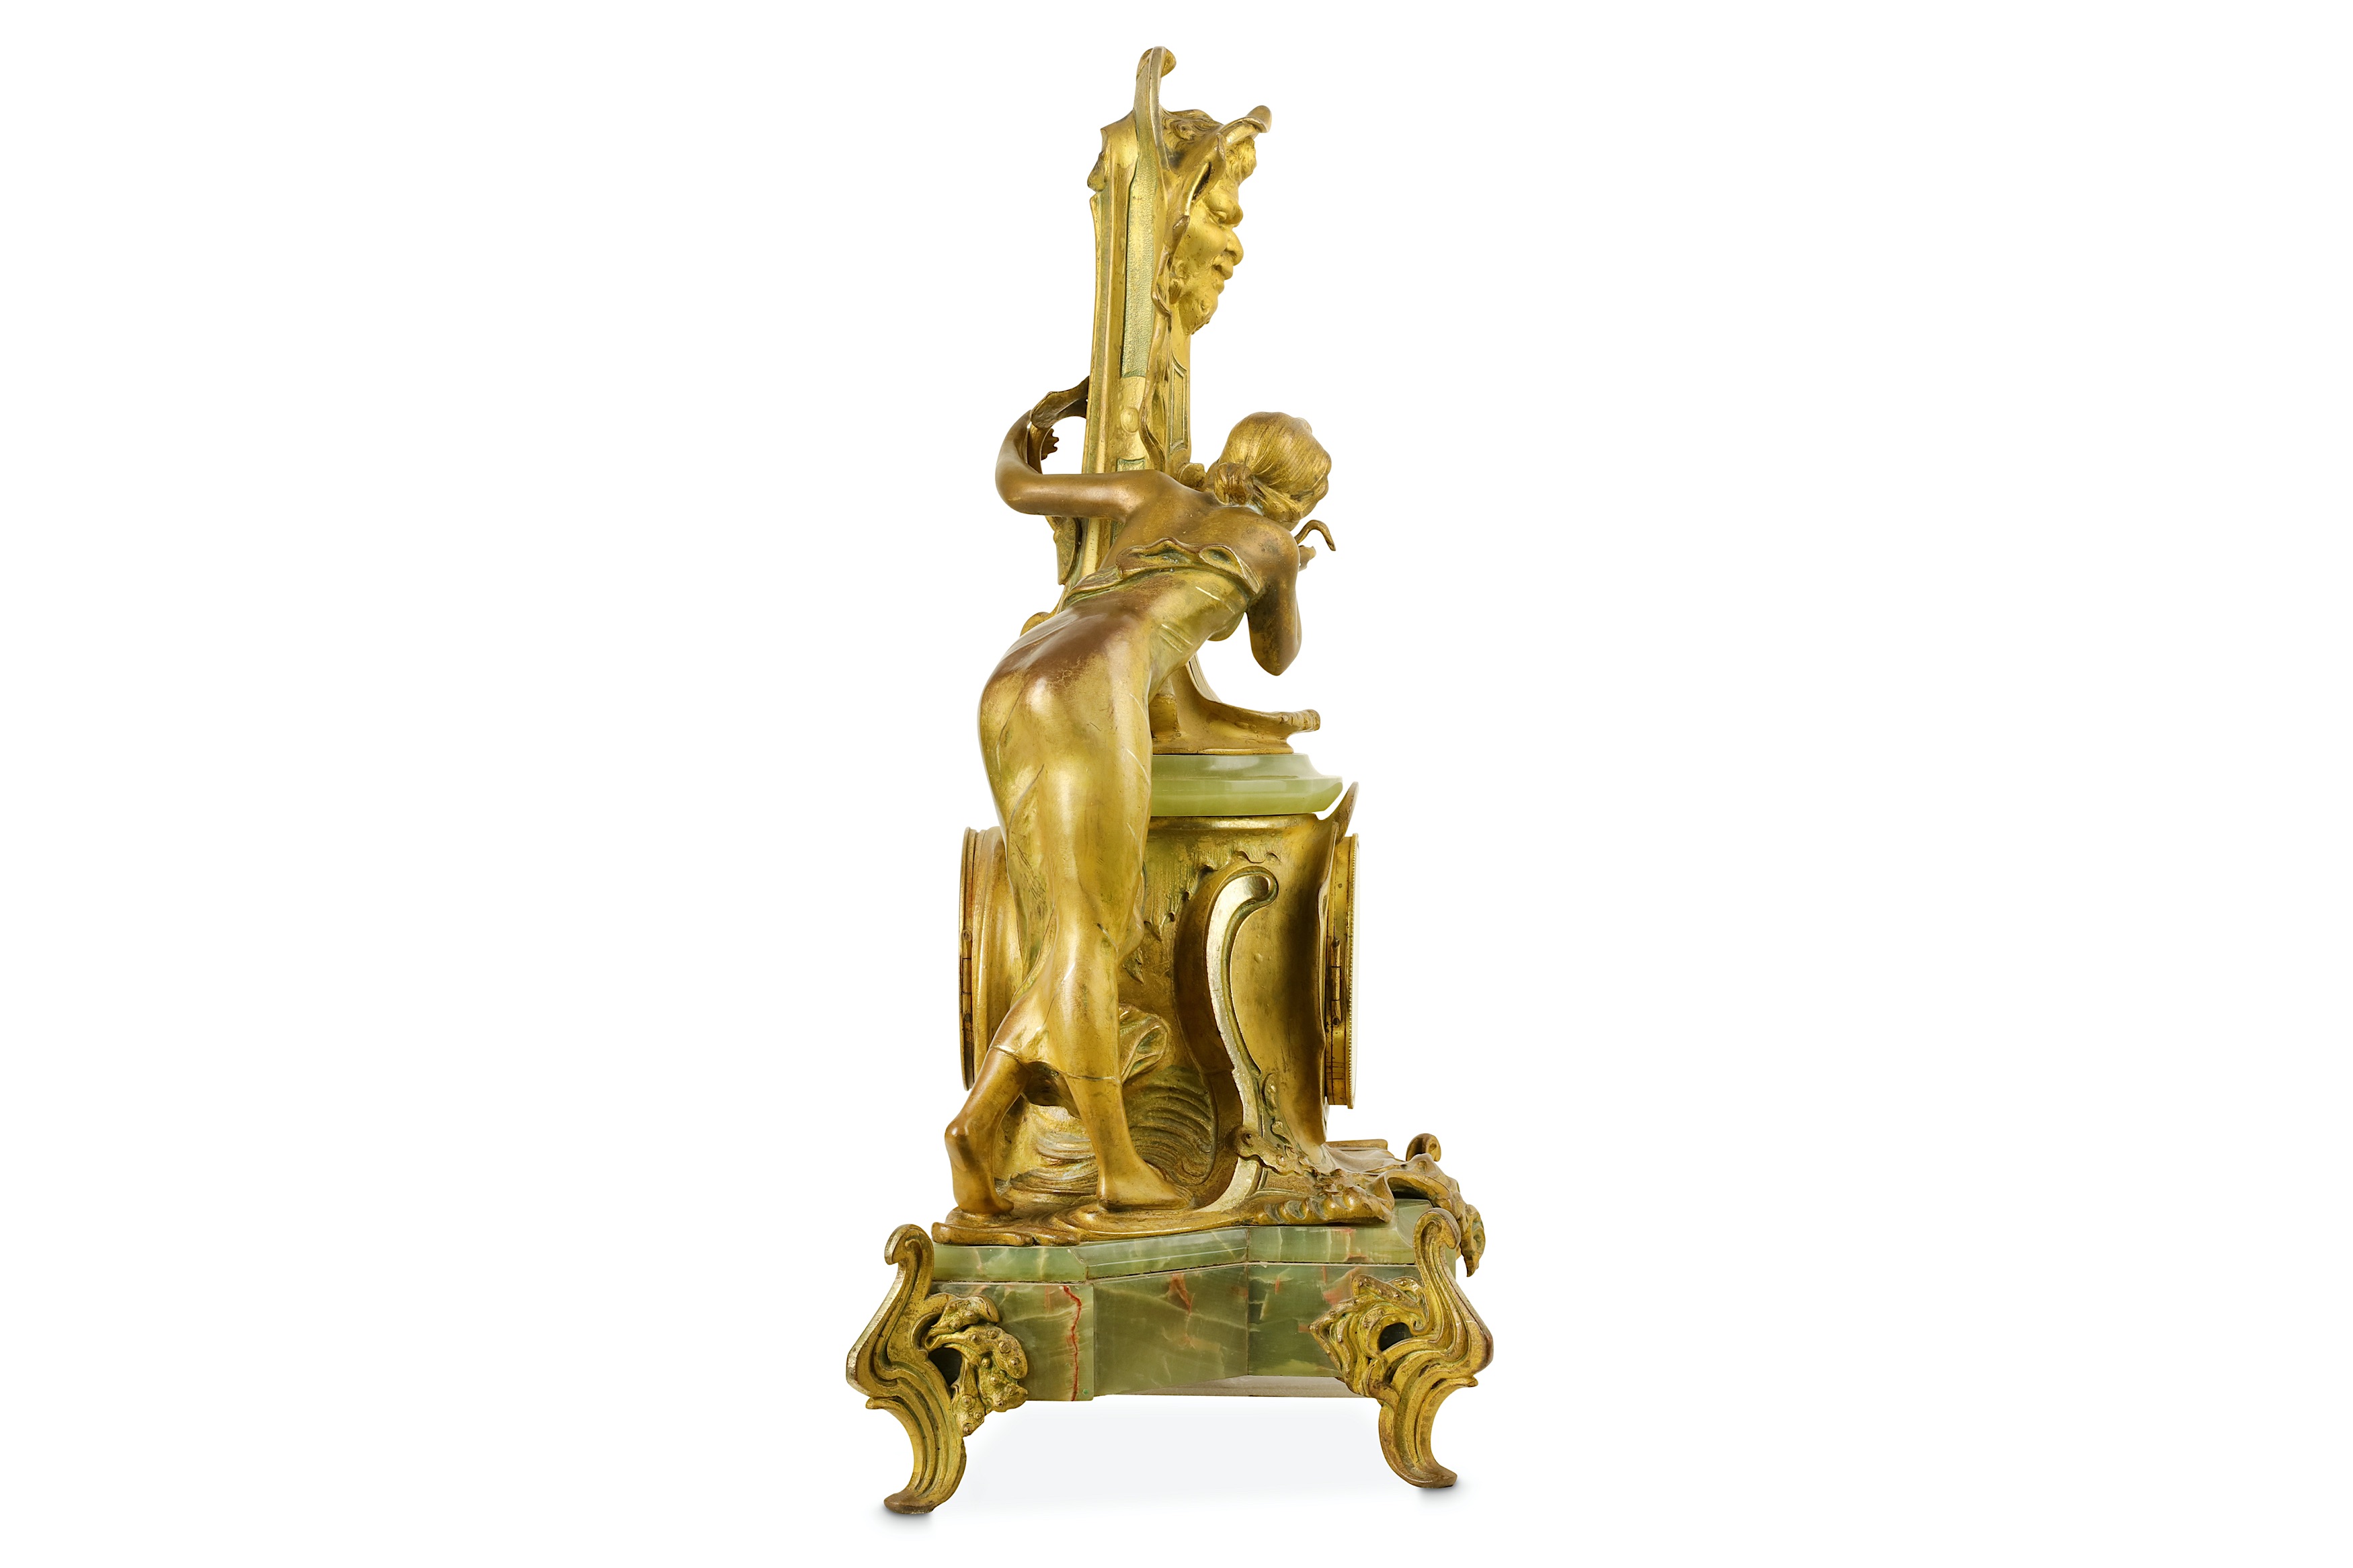 AN EARLY 20TH CENTURY ART NOUVEAU STYLE GILT BRONZE AND ONYX FIGURAL MANTEL CLOCK 'LA SOURCE' - Image 2 of 6